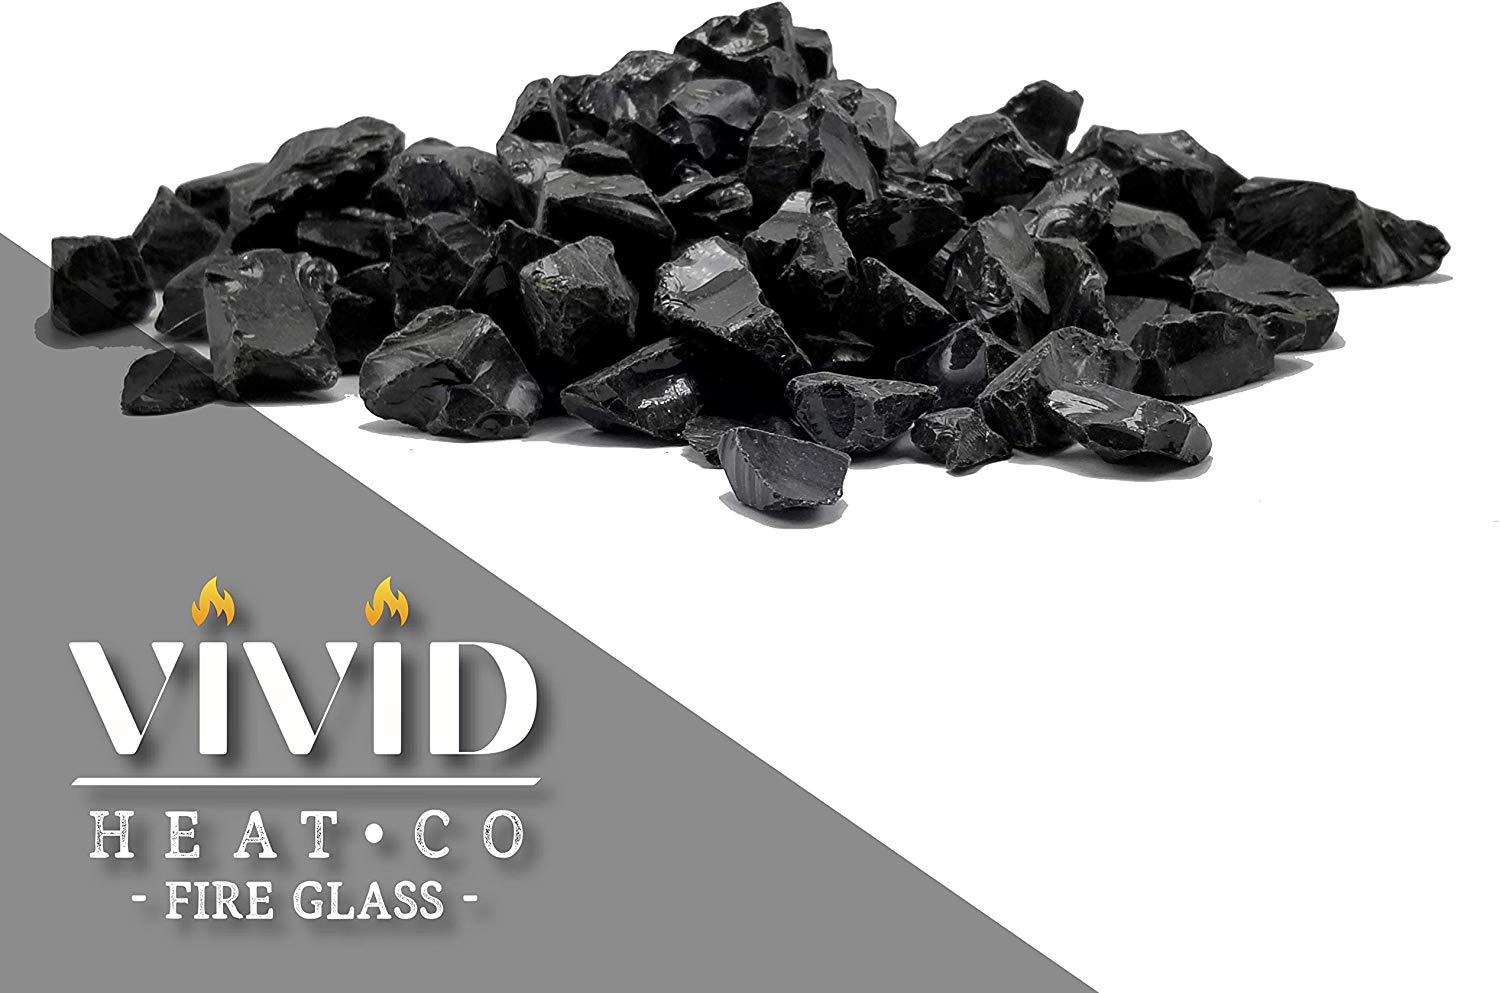 Black 1/2" - 3/4" Large Premium Fire Glass for Fireplace and Fire Pit